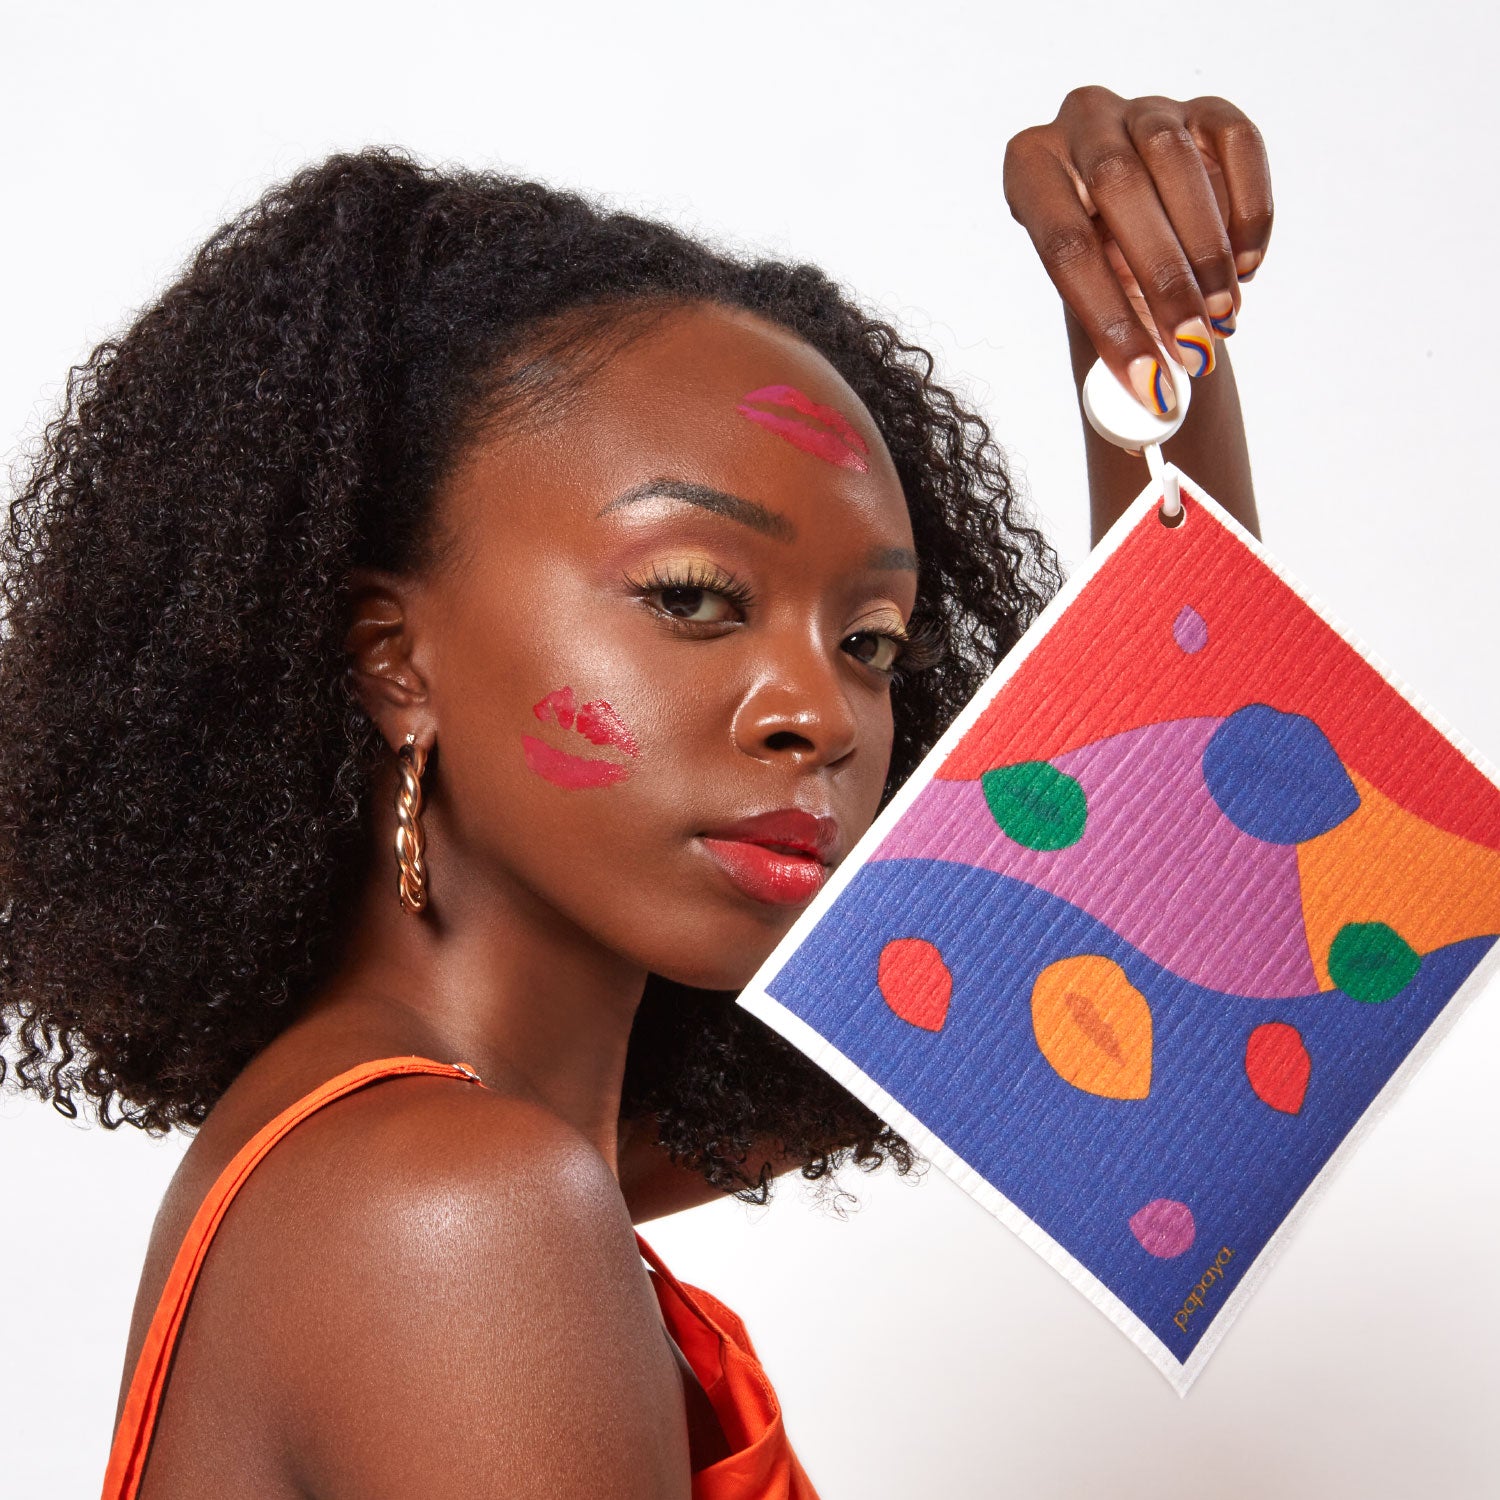 Model holding reusable paper towel with bright lips design and lipstick kisses on her face